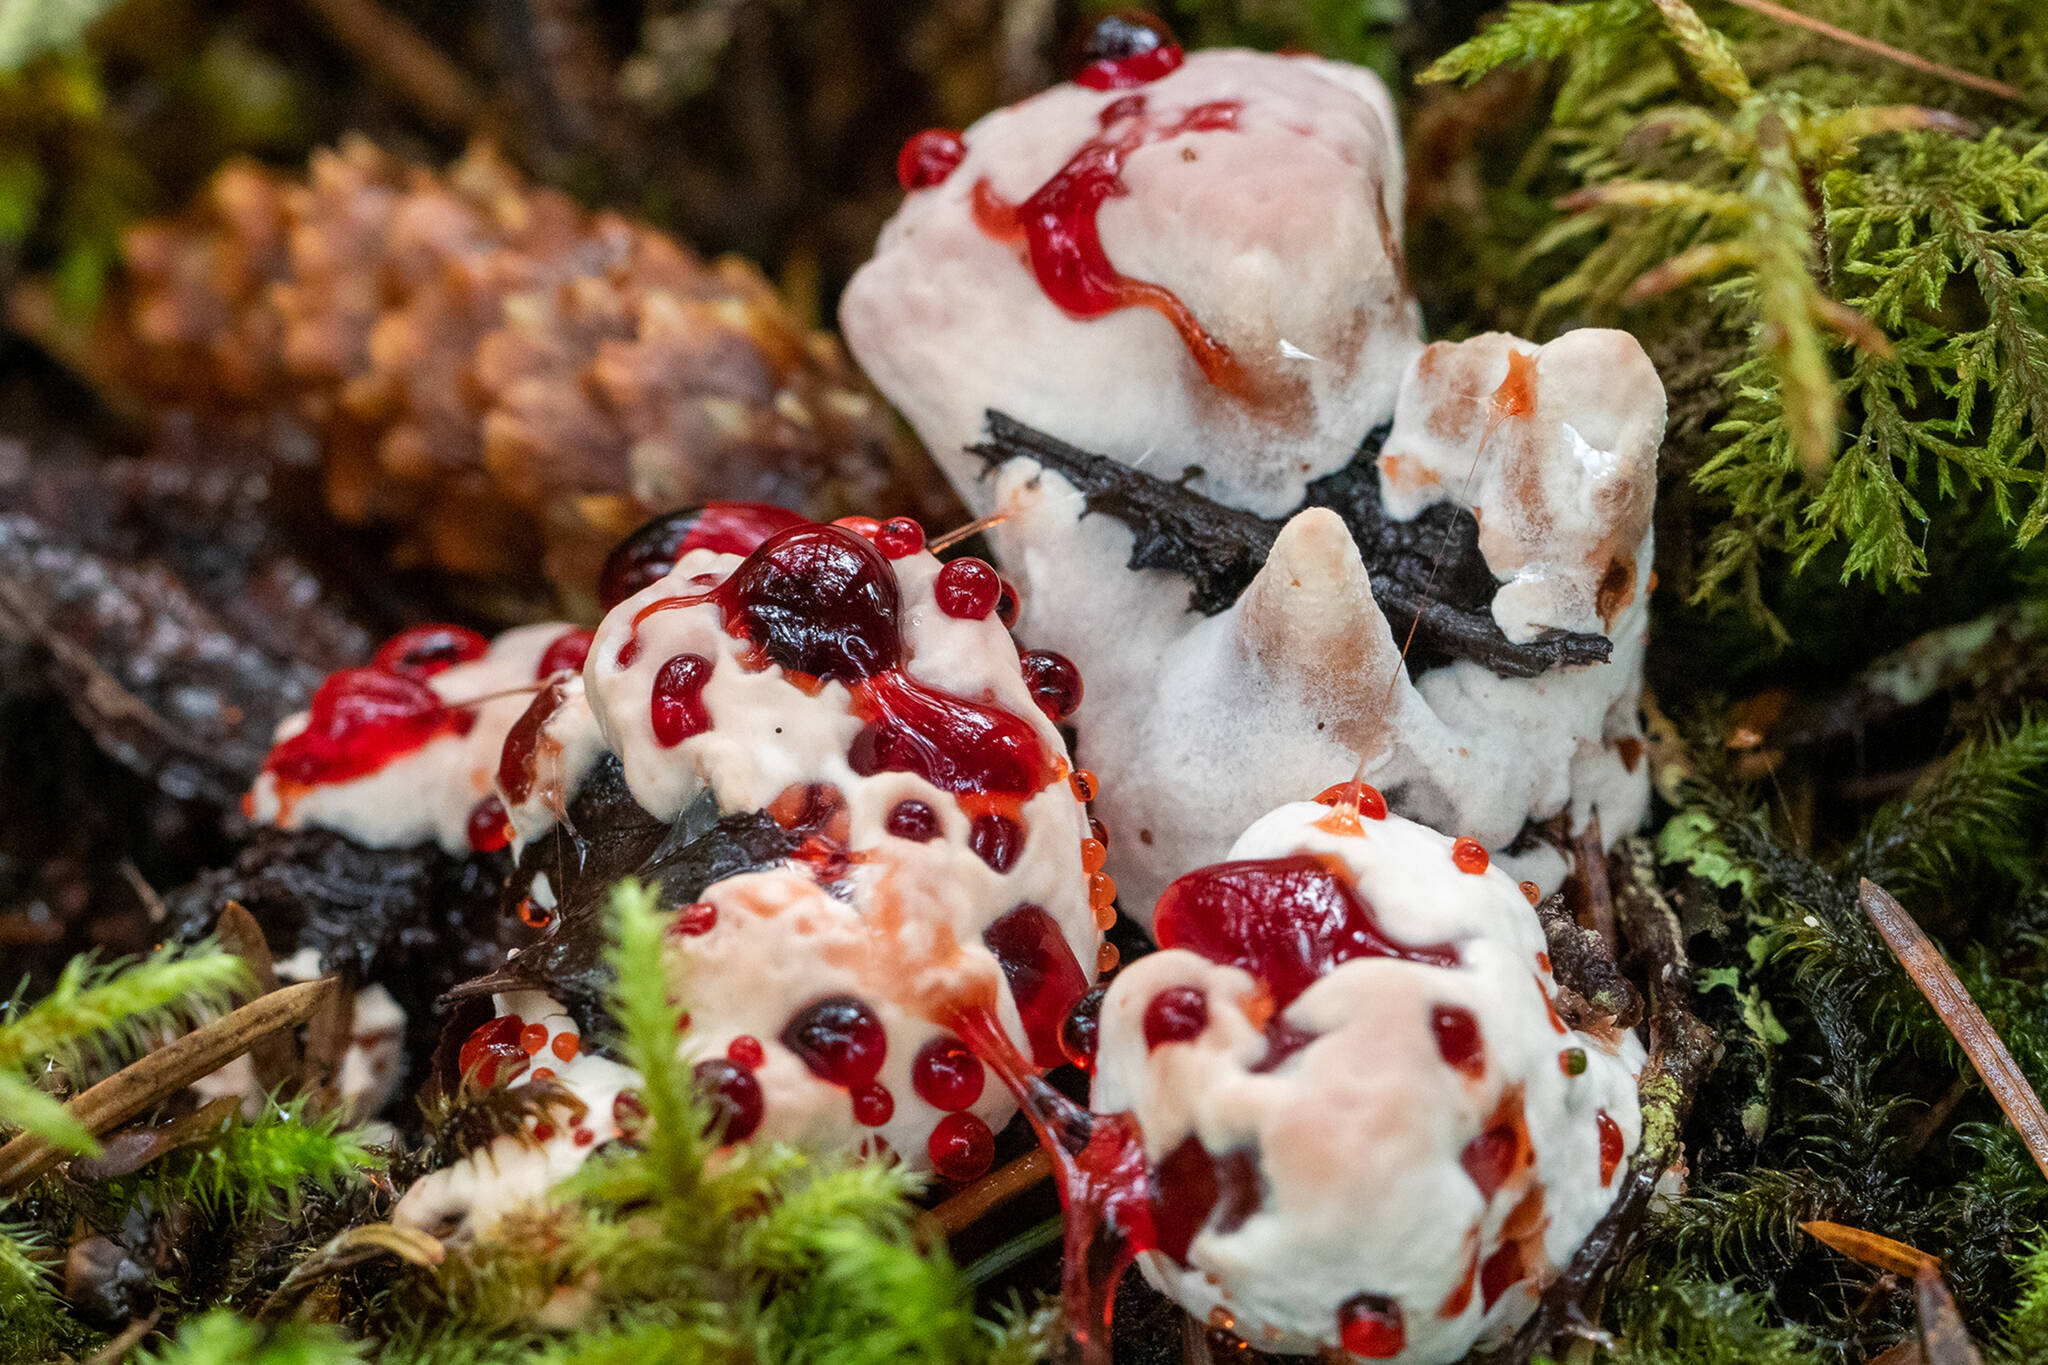 The bleeding tooth fungus is readily recognized when mature, with the watery red bubbles on the surface. (Courtesy Photo / Kerry Howard)